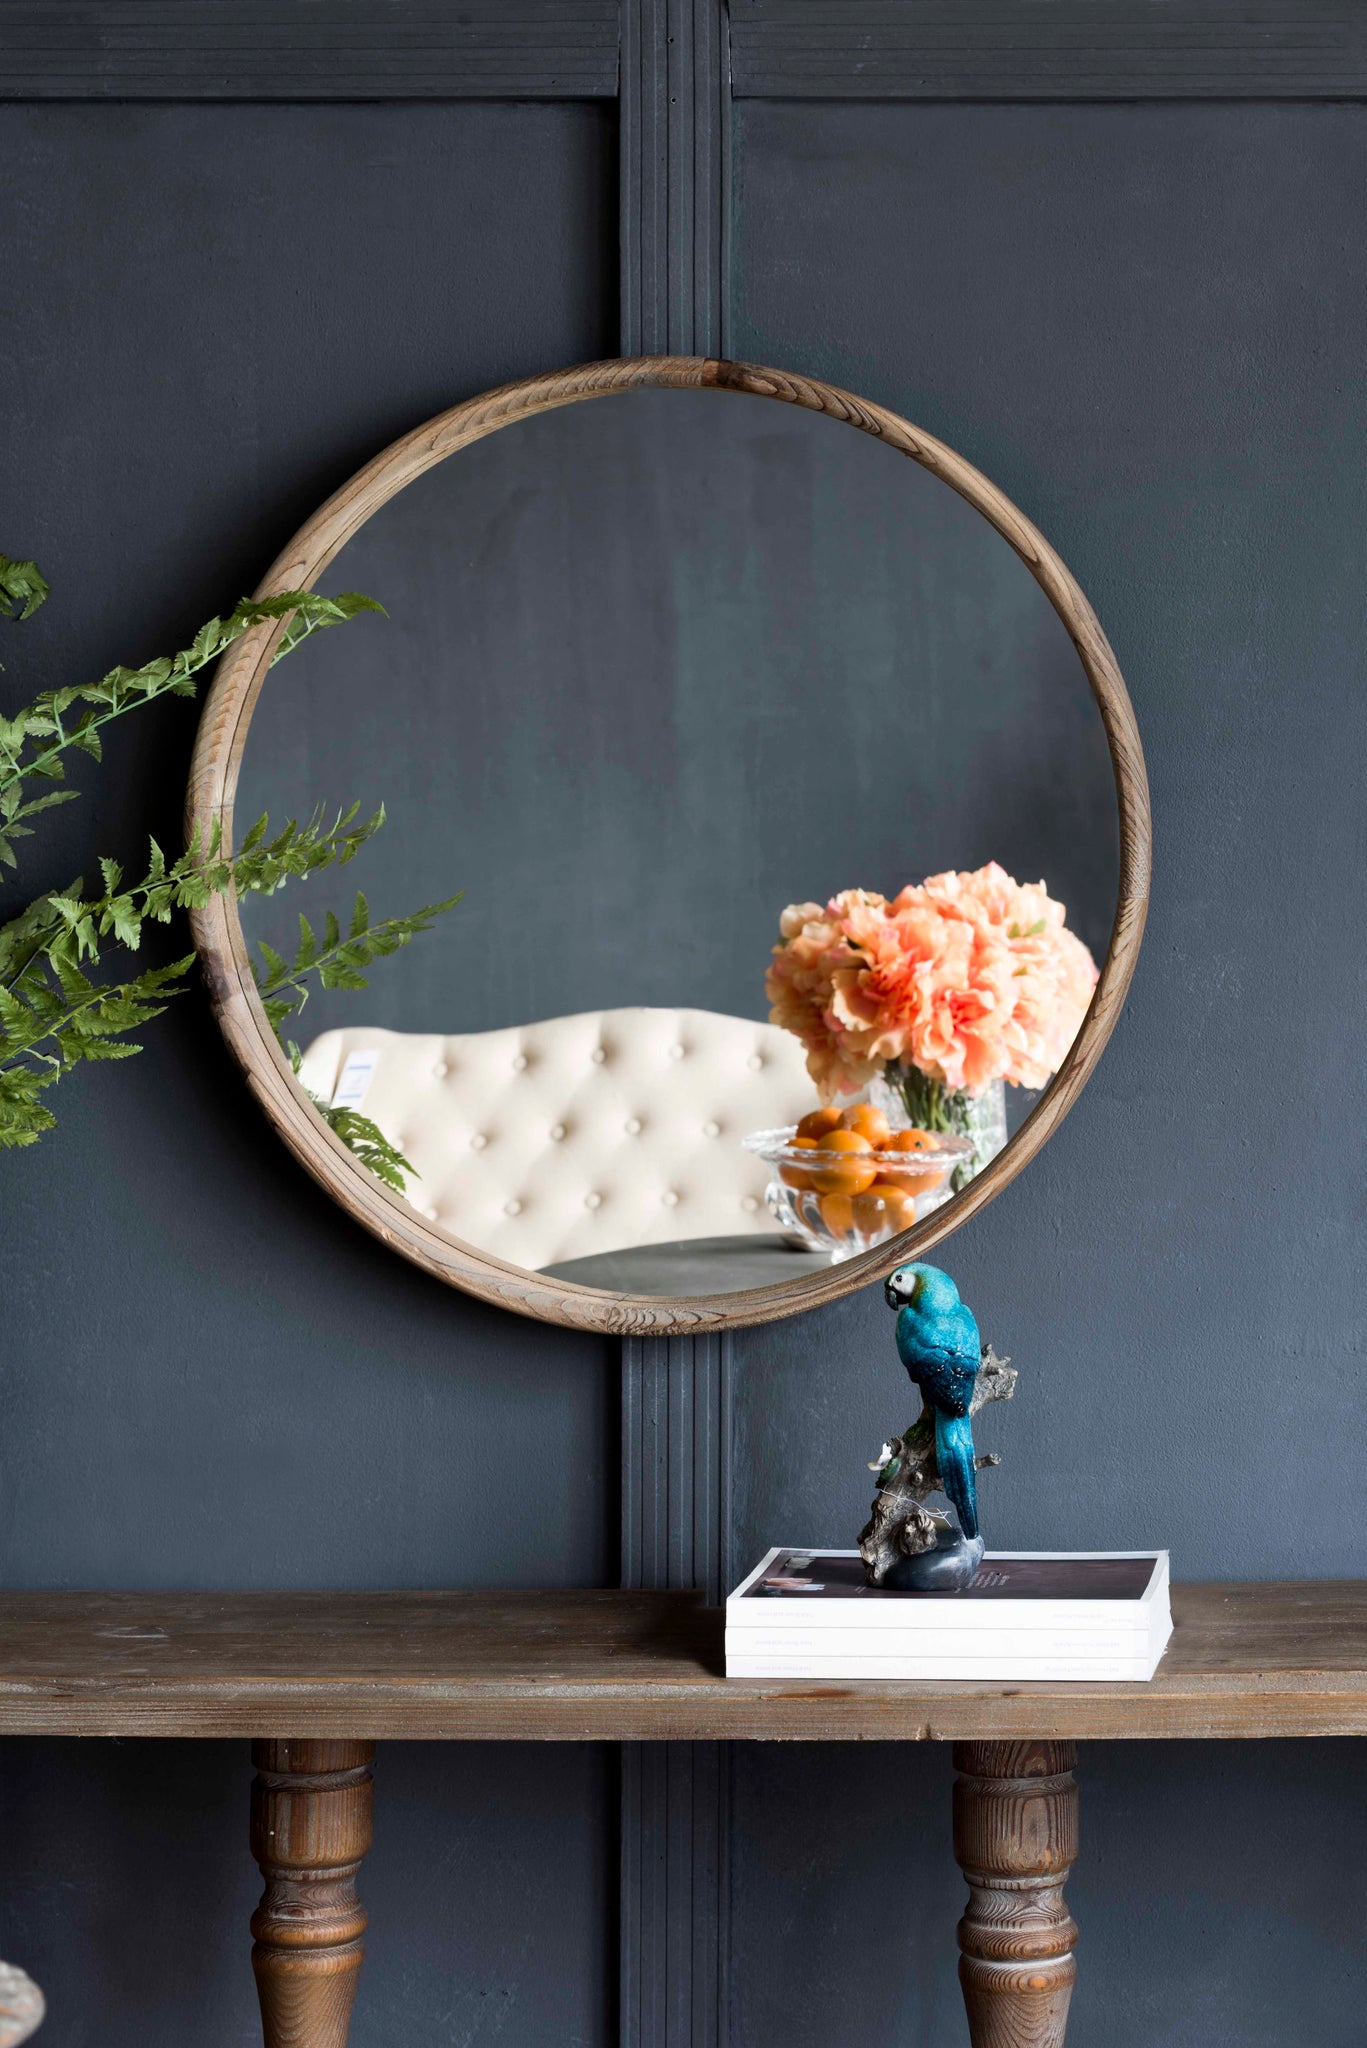 28" Round Wood Mirror, Wall Mounted Mirror Home